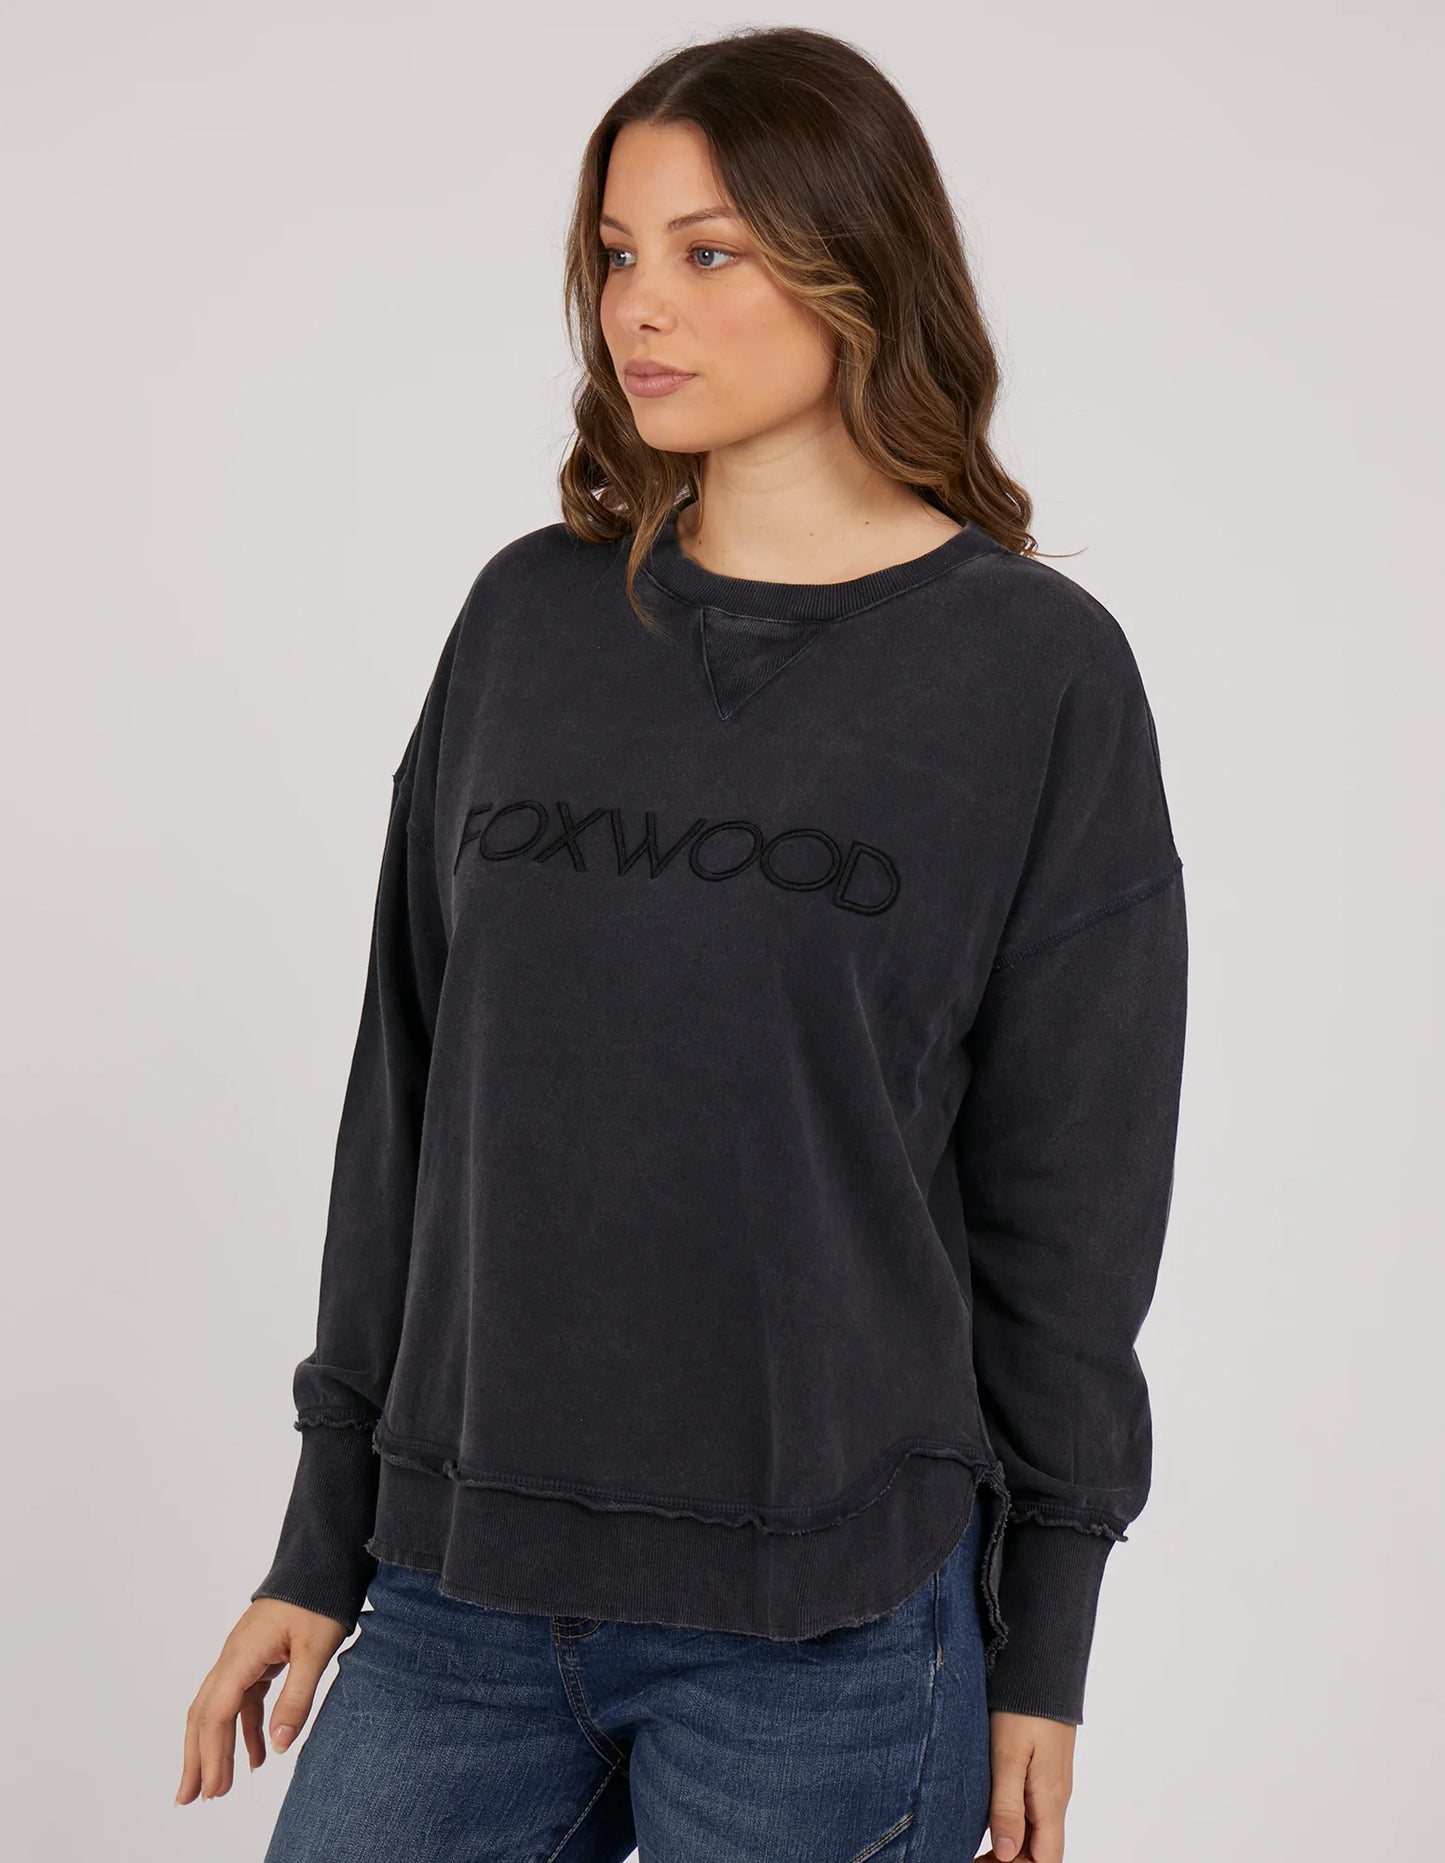 FOXWOOD WASHED SIMPLIFIED CREW NAVY